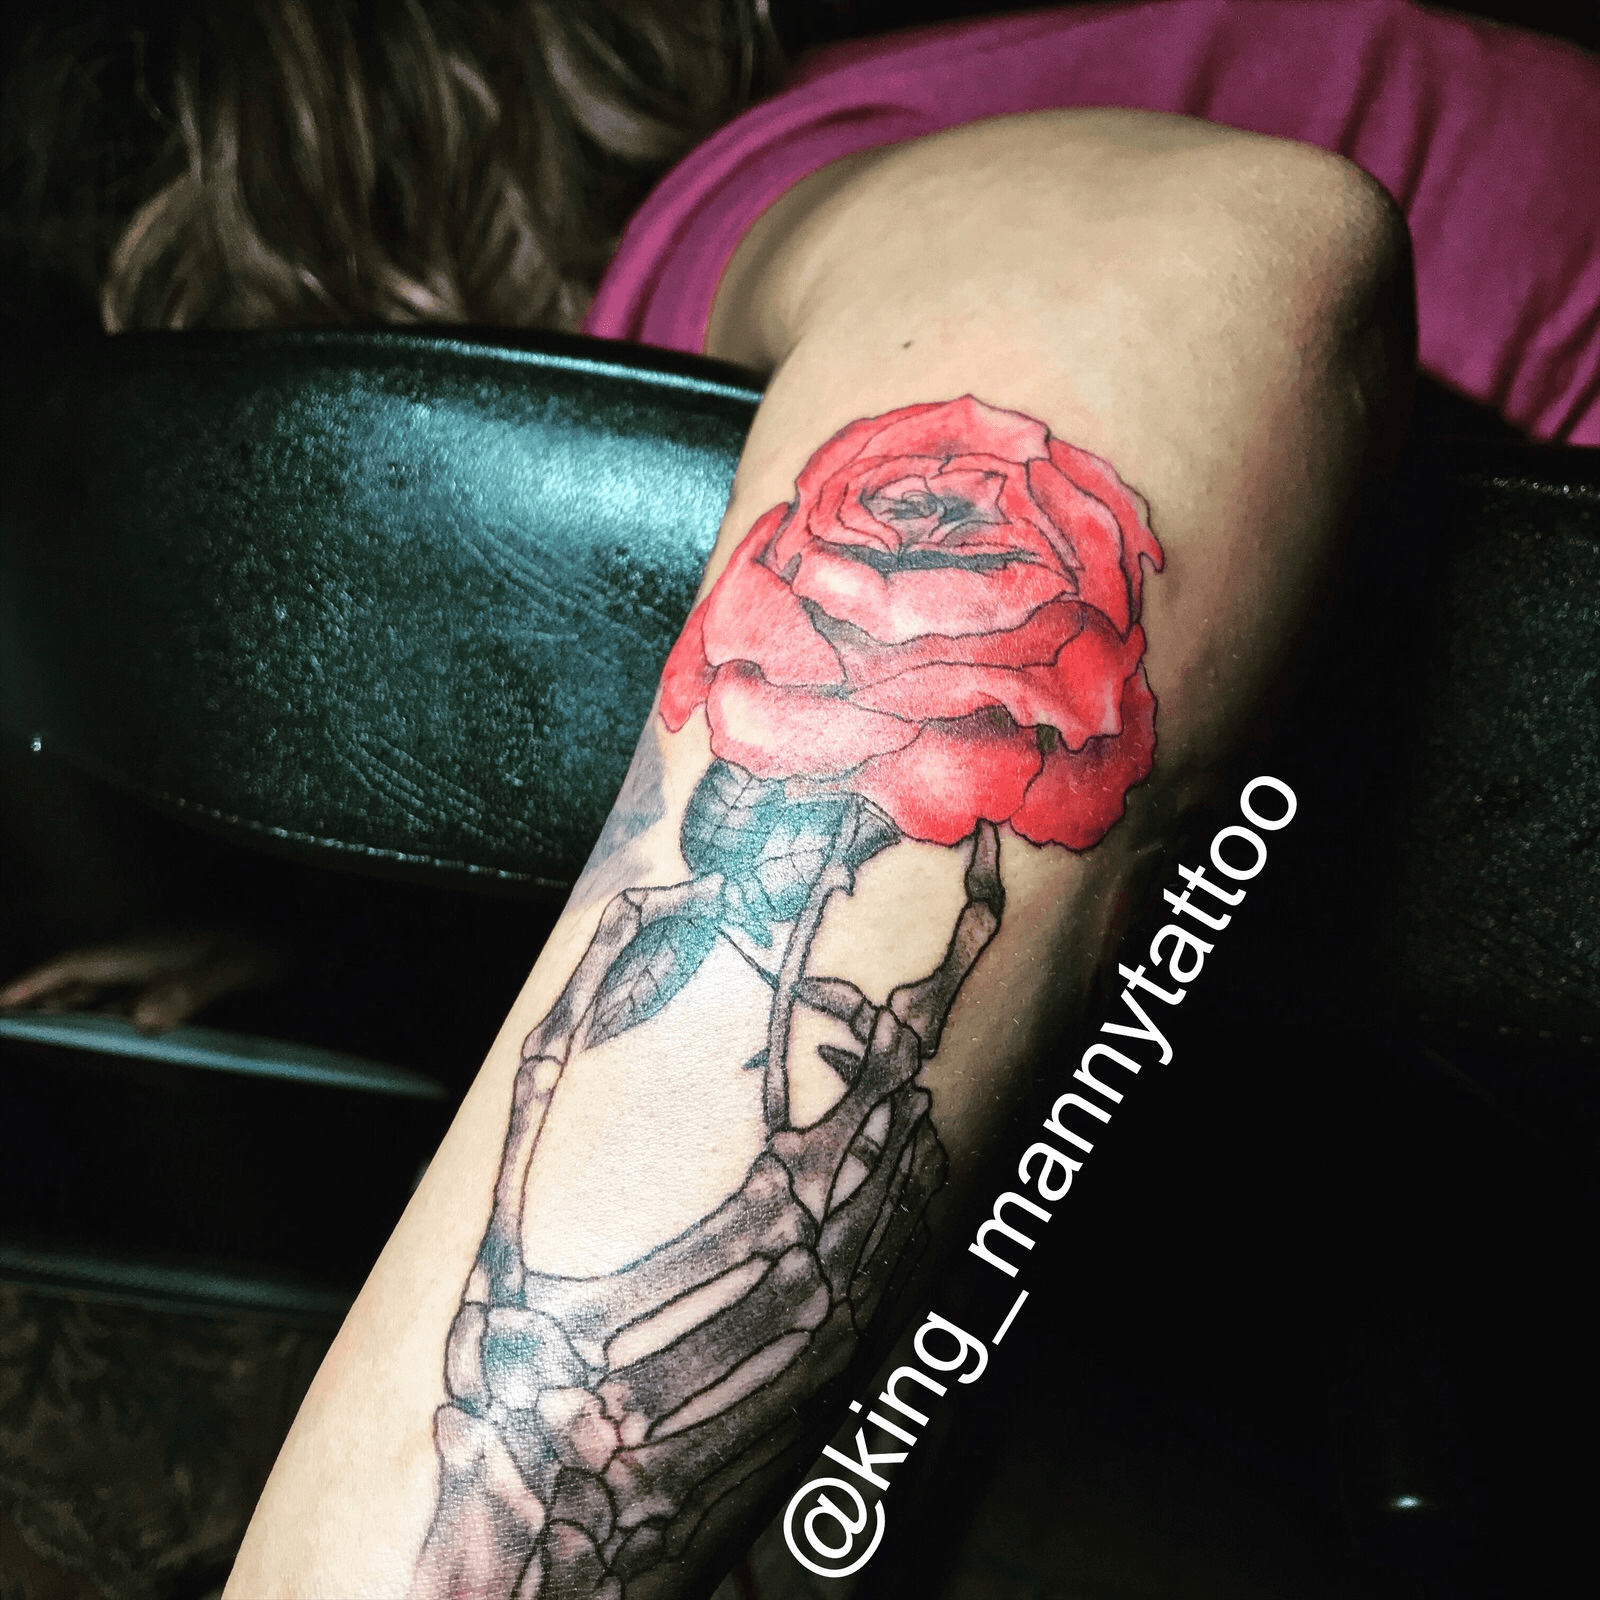 Skeleton hand holding a rose tattoo First tattoo  Skeleton hand tattoo Rose  tattoo meaning Skull hand tattoo